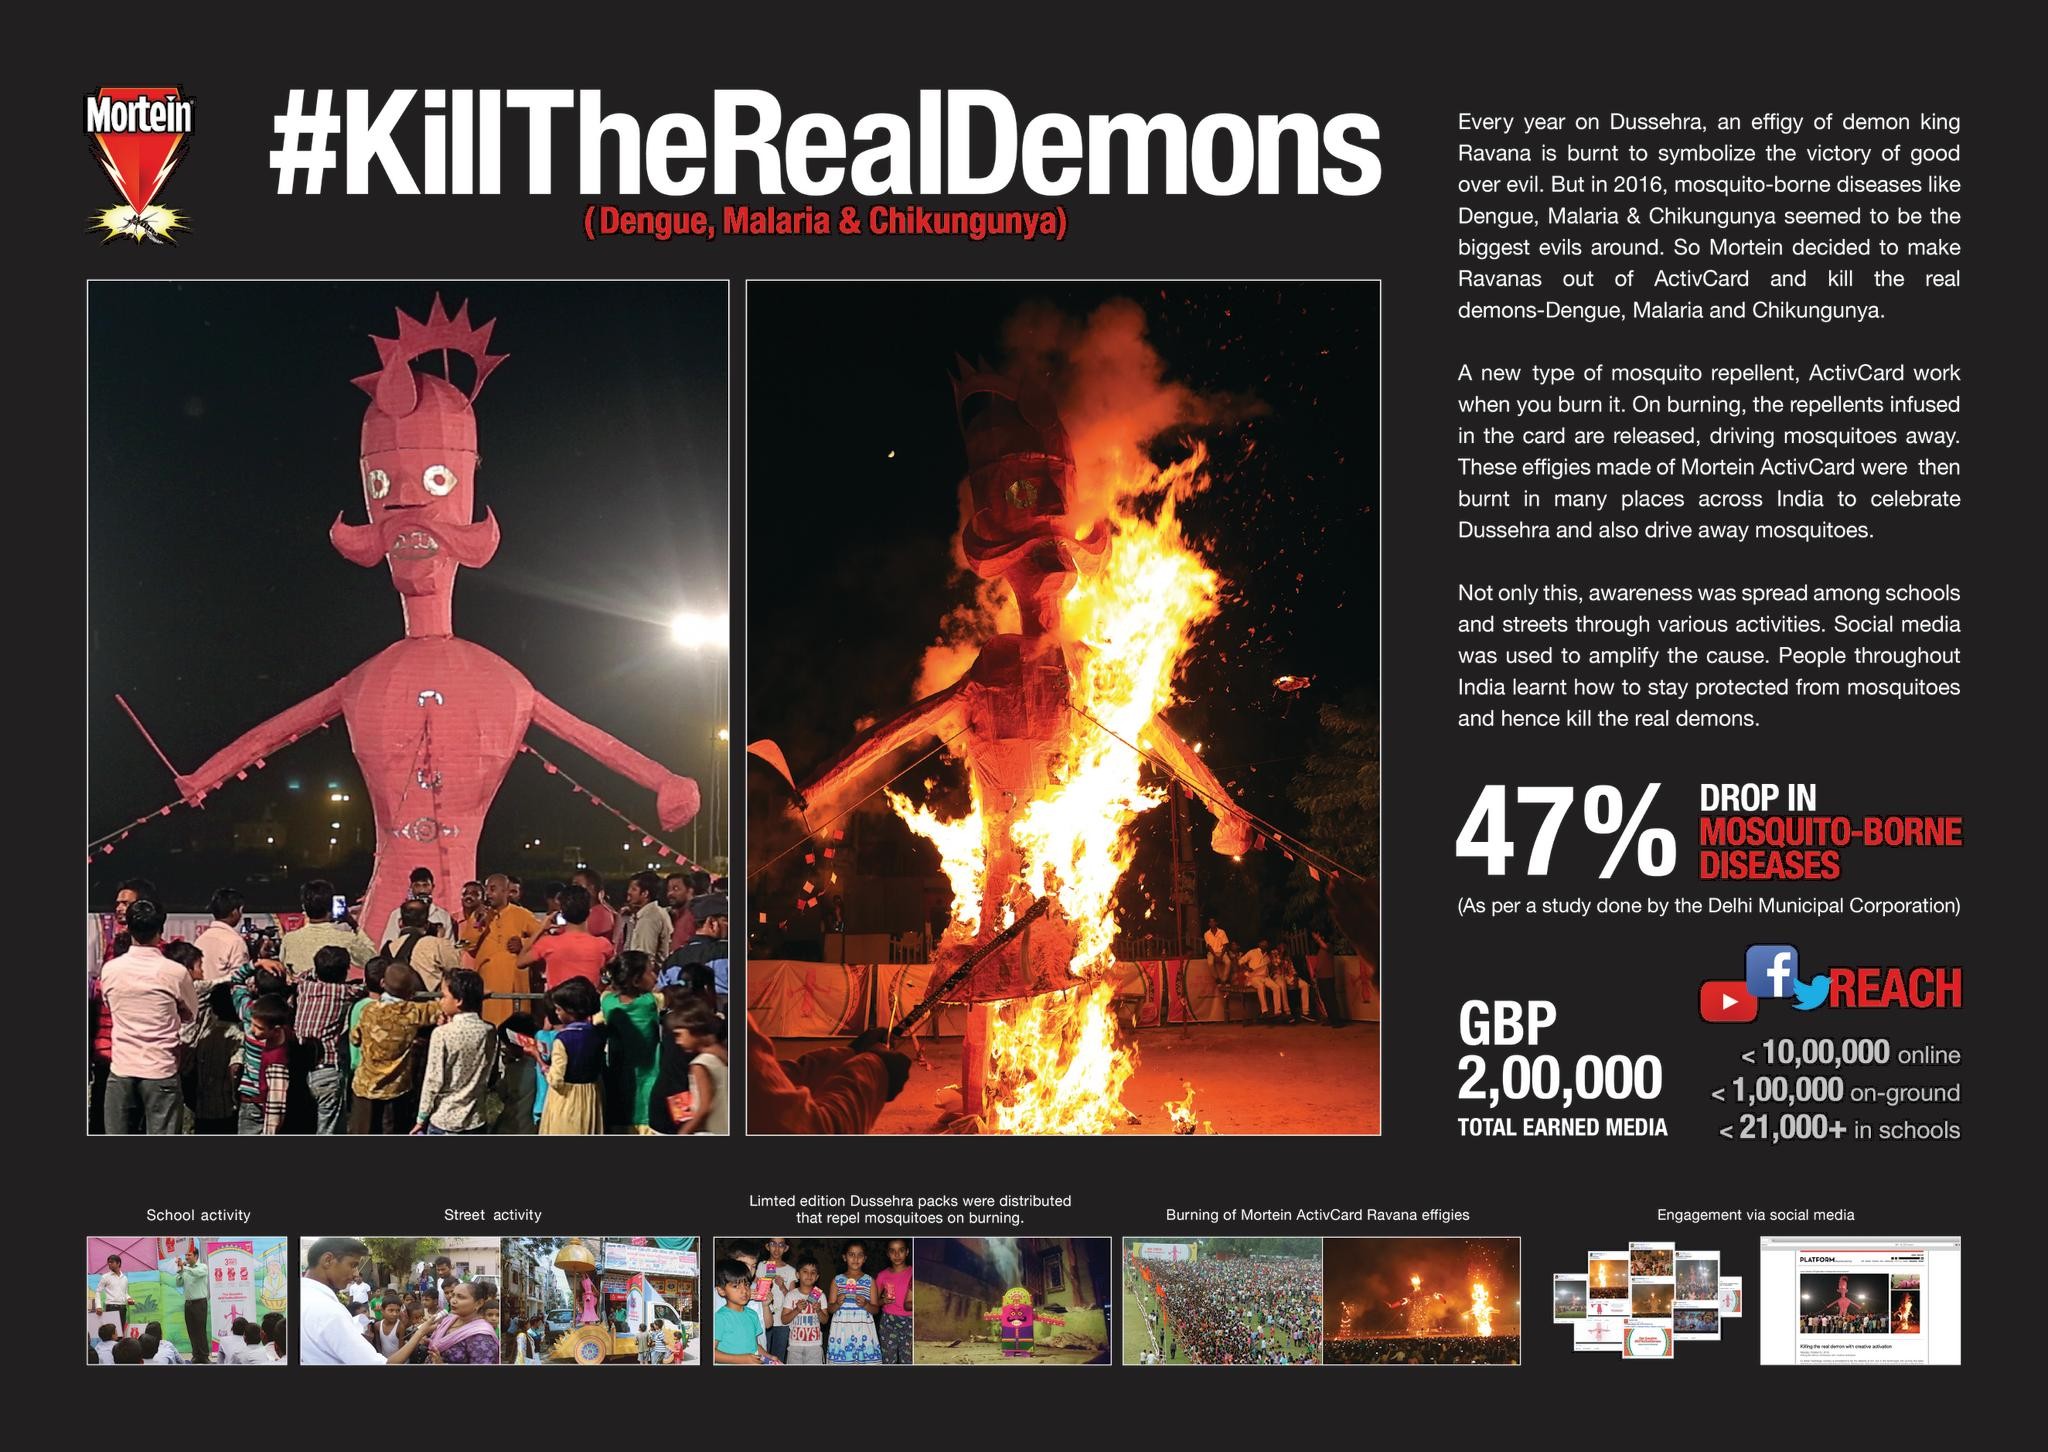 Mortein - Kill the real demons